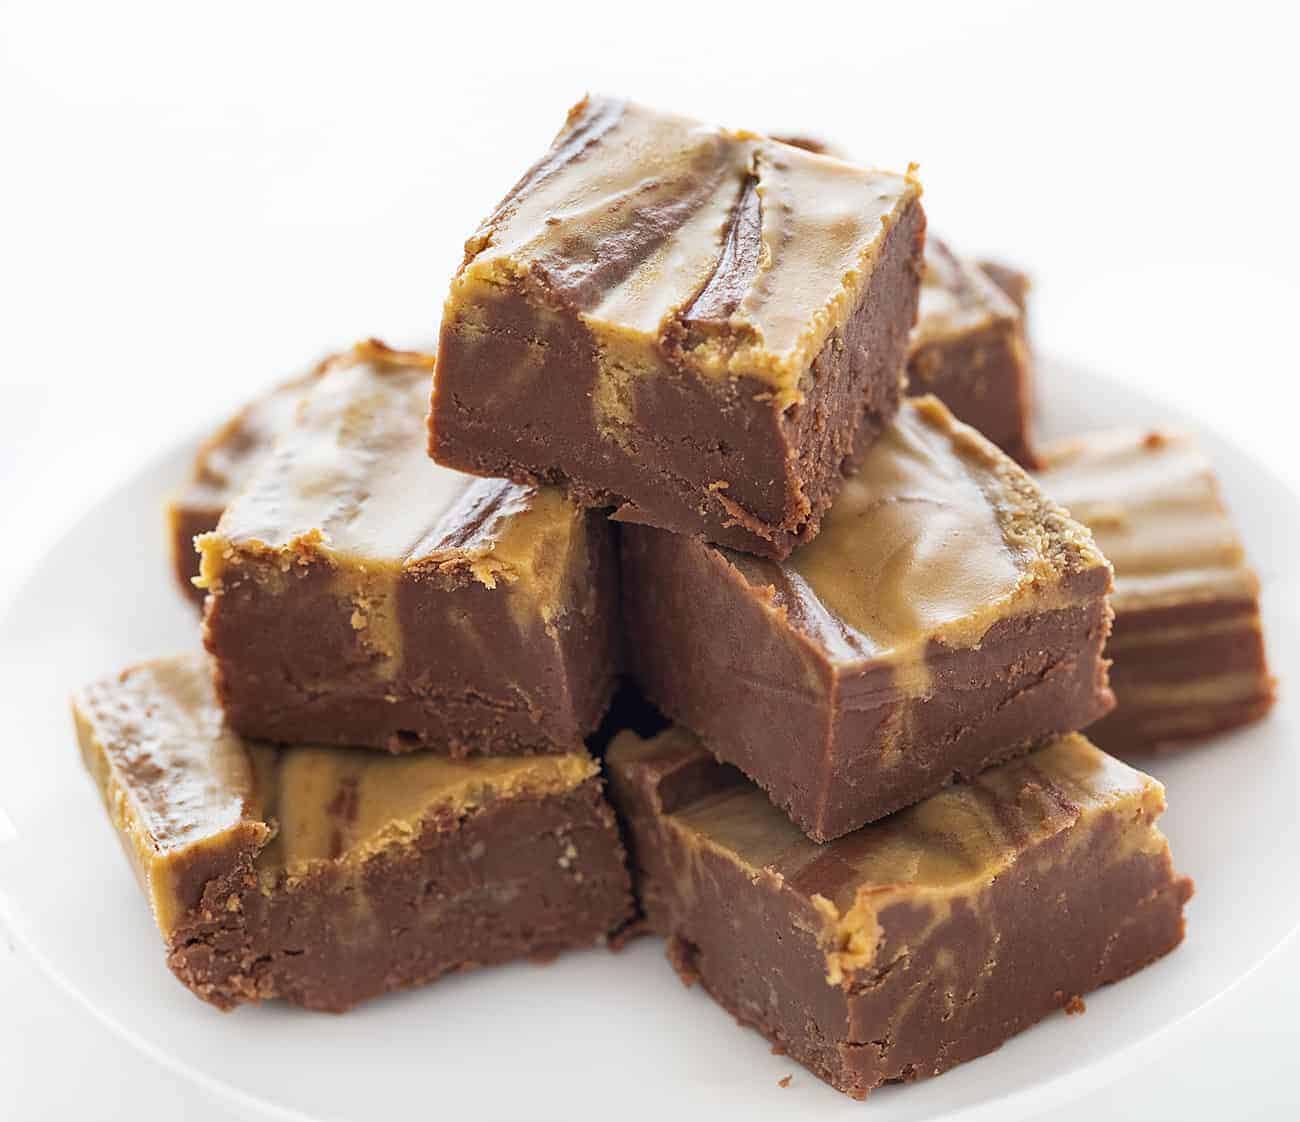 Stacked Chocolate Peanut Butter Fudge on a White Plate